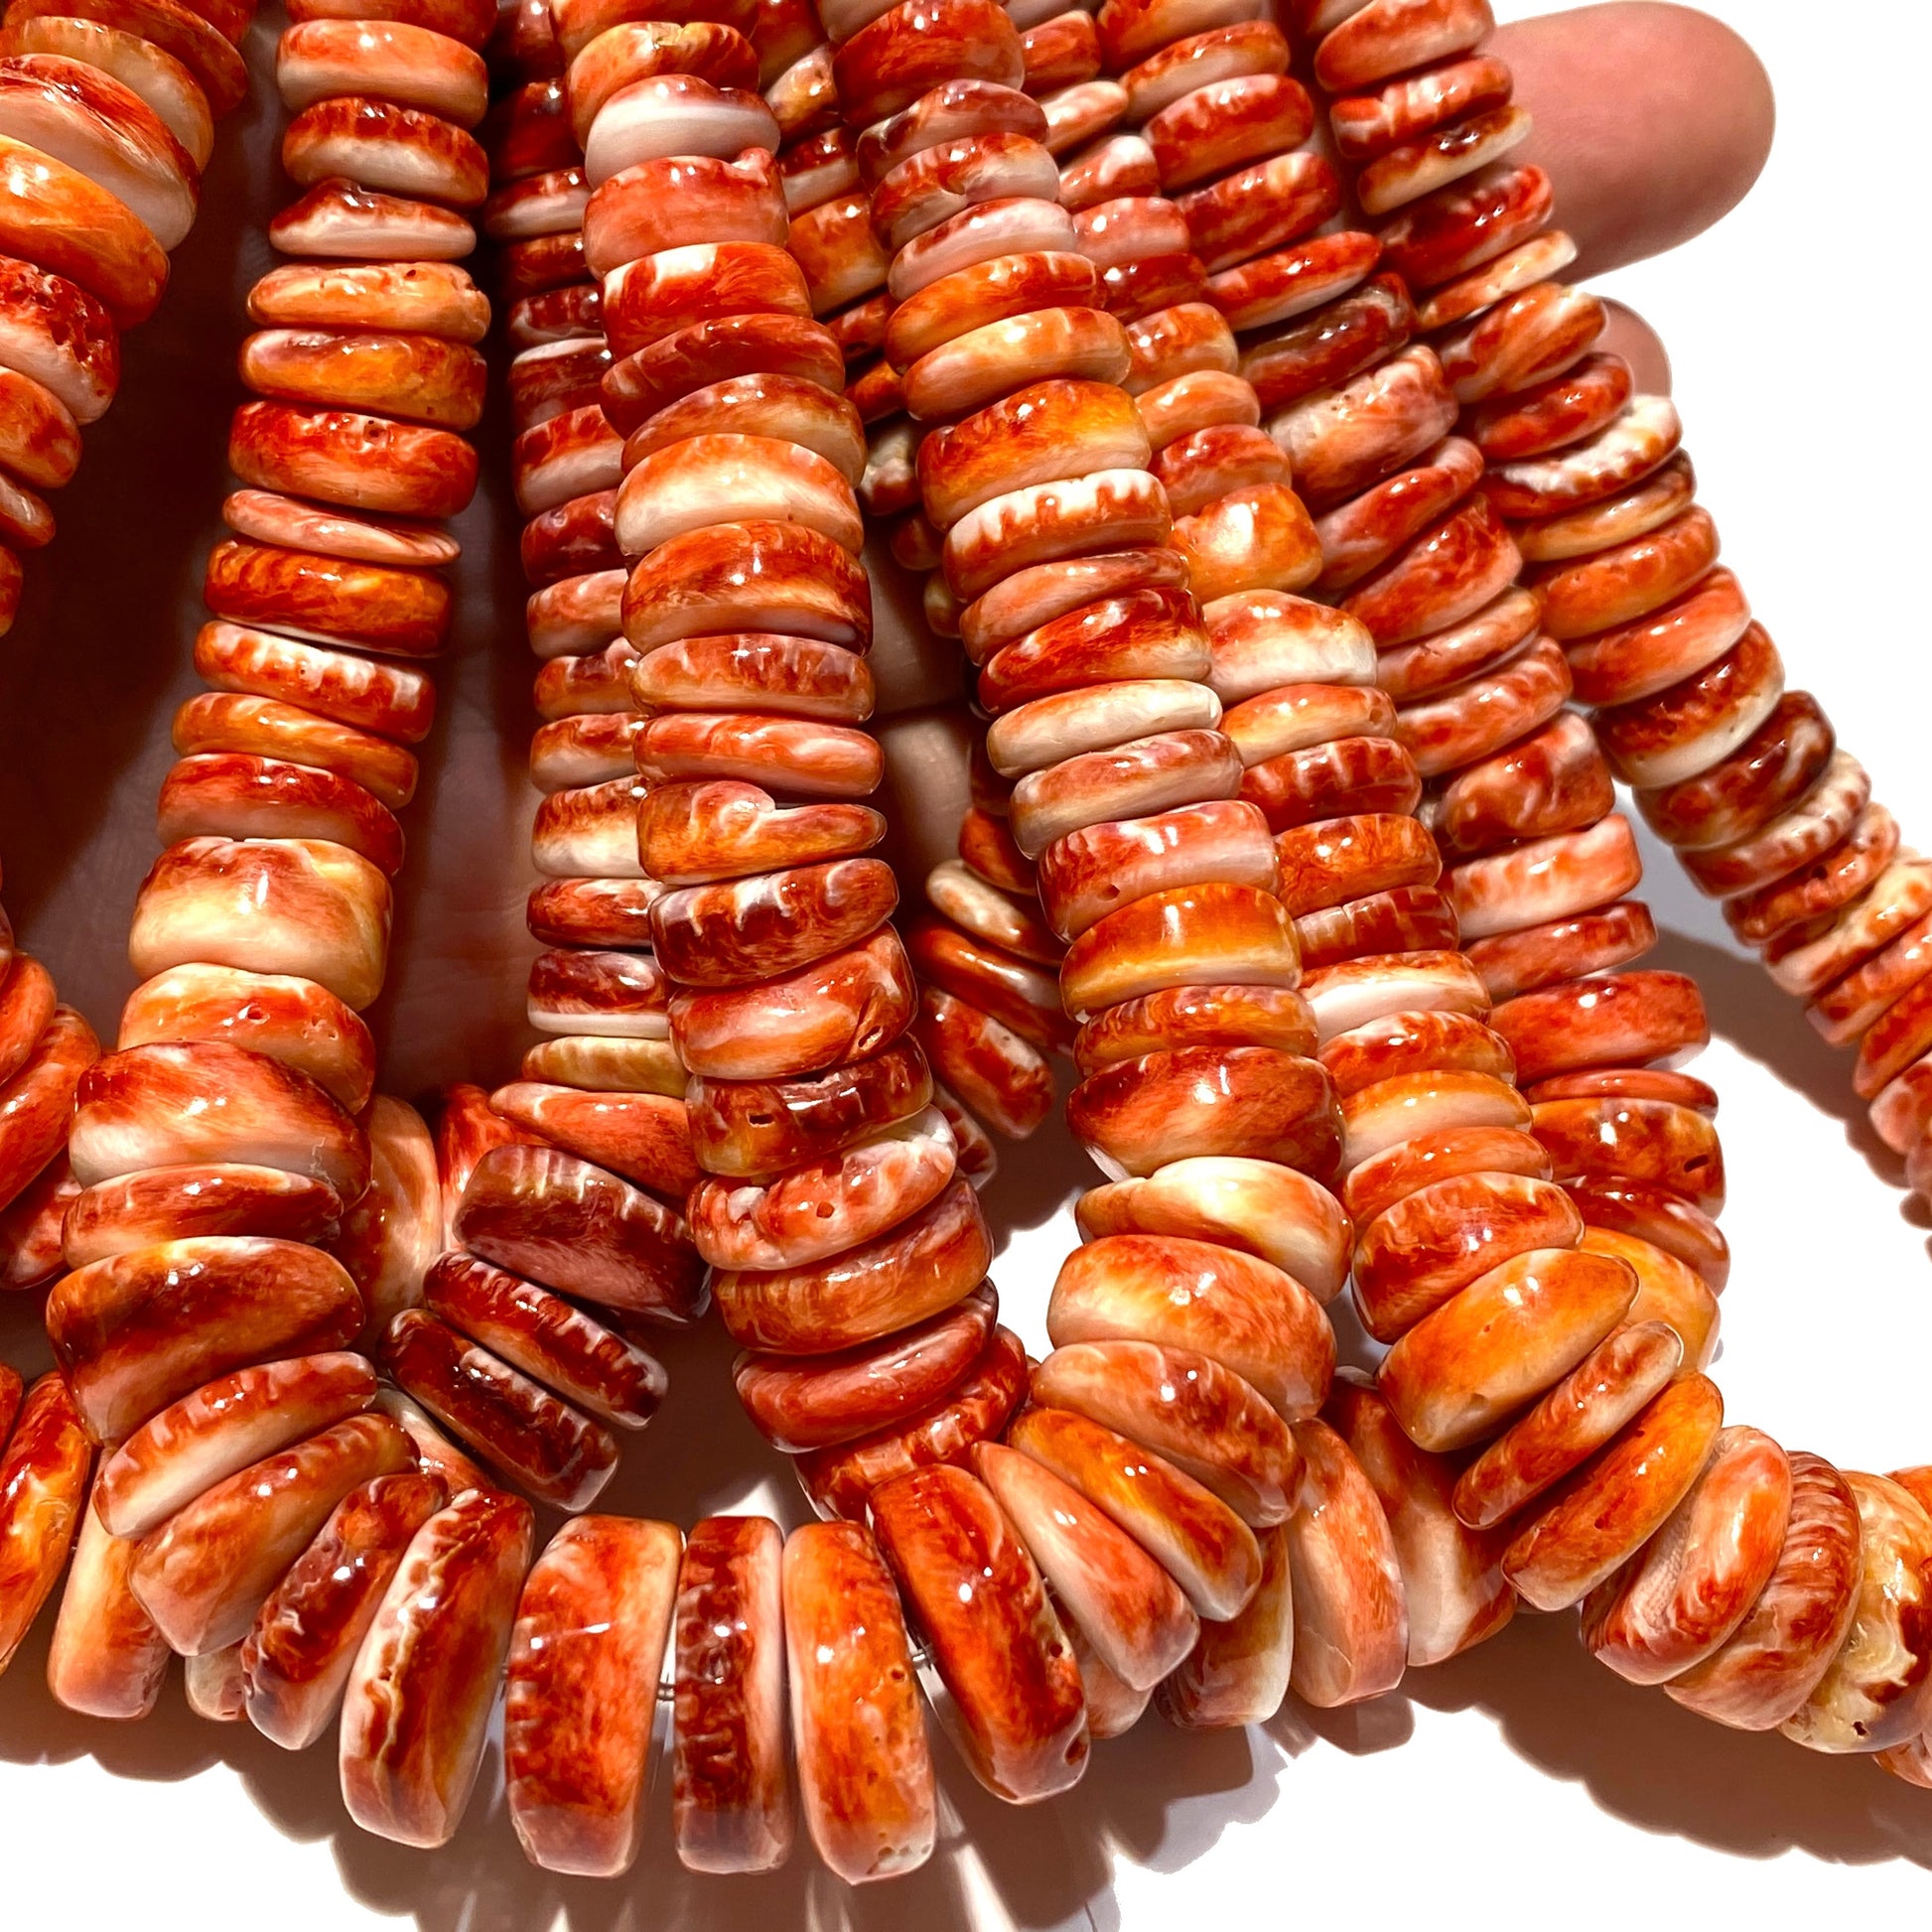 Orange Spiny Oyster Shell Beads